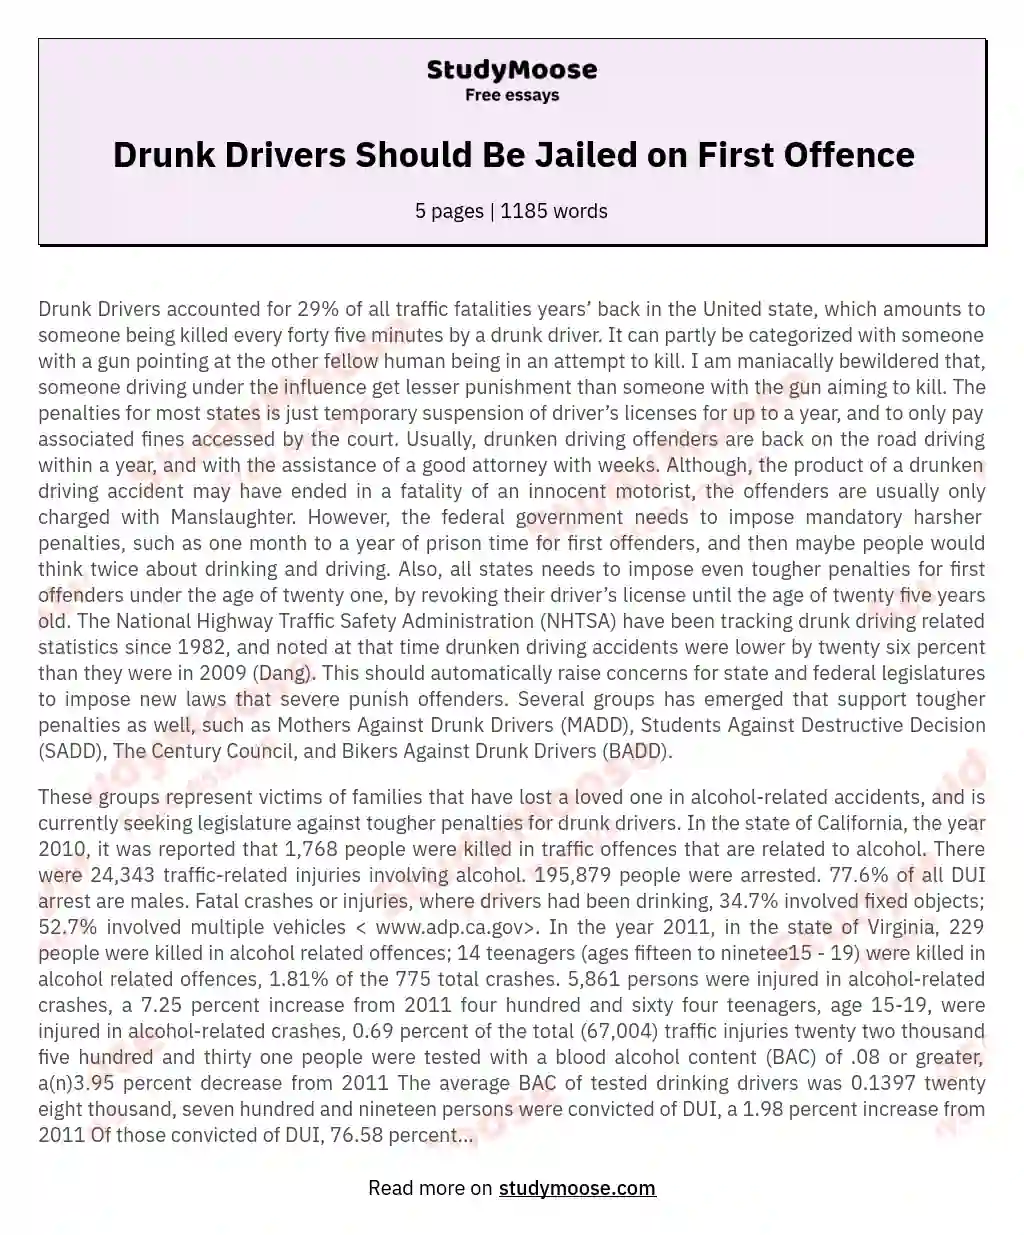 Drunk Drivers Should Be Jailed on First Offence essay